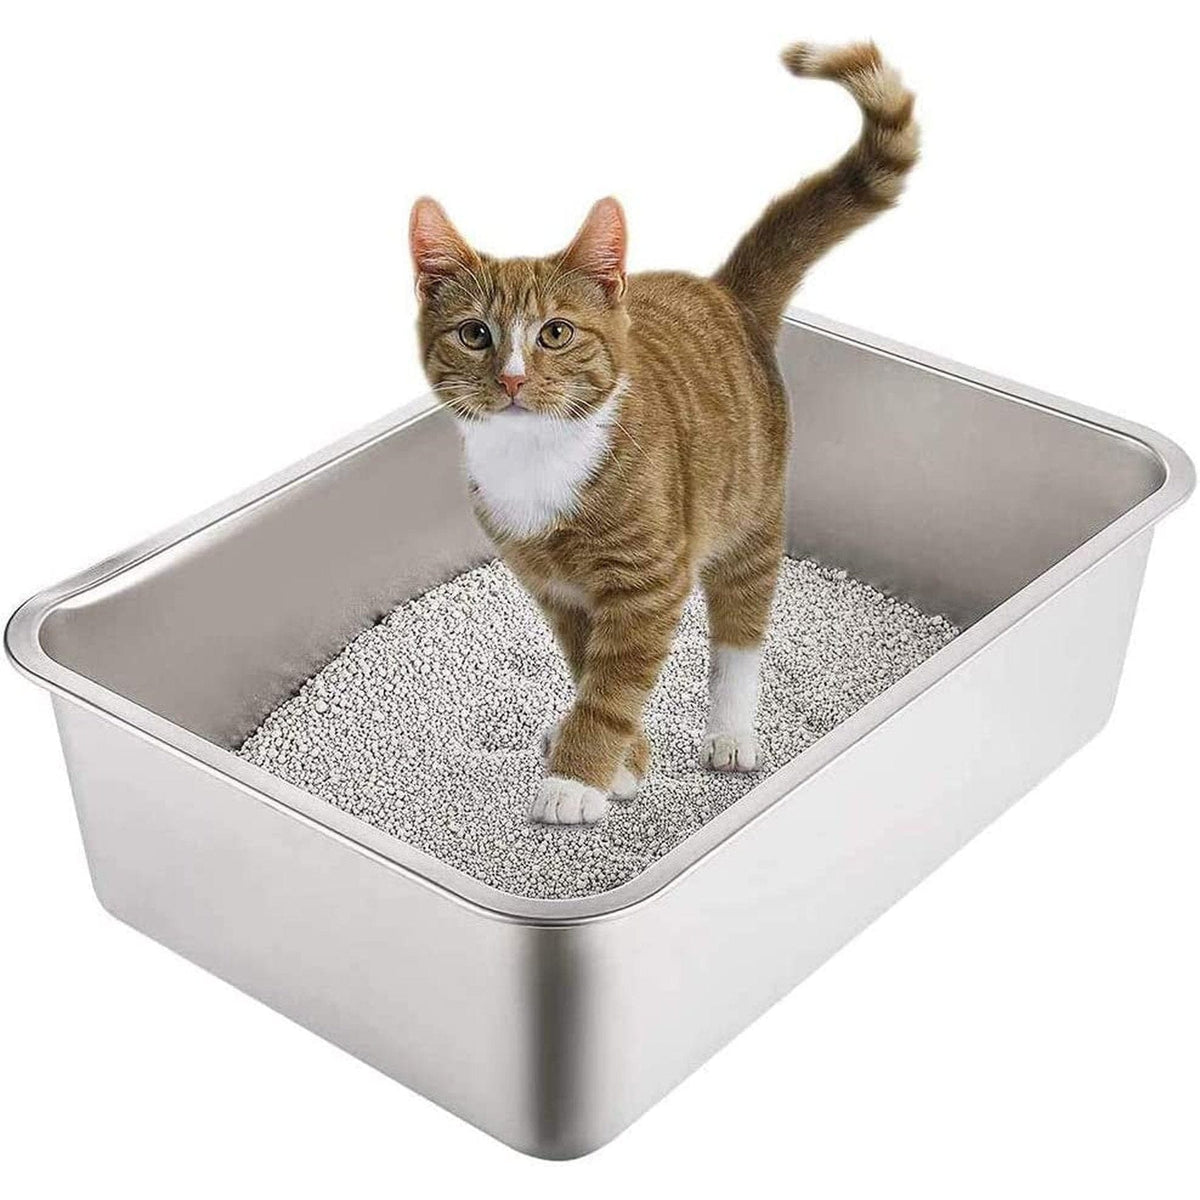 🐱 Durable Stainless Steel Cat Litter Box 📦 Medium:19.8*13.8in Pets Paradise Pet Supplies